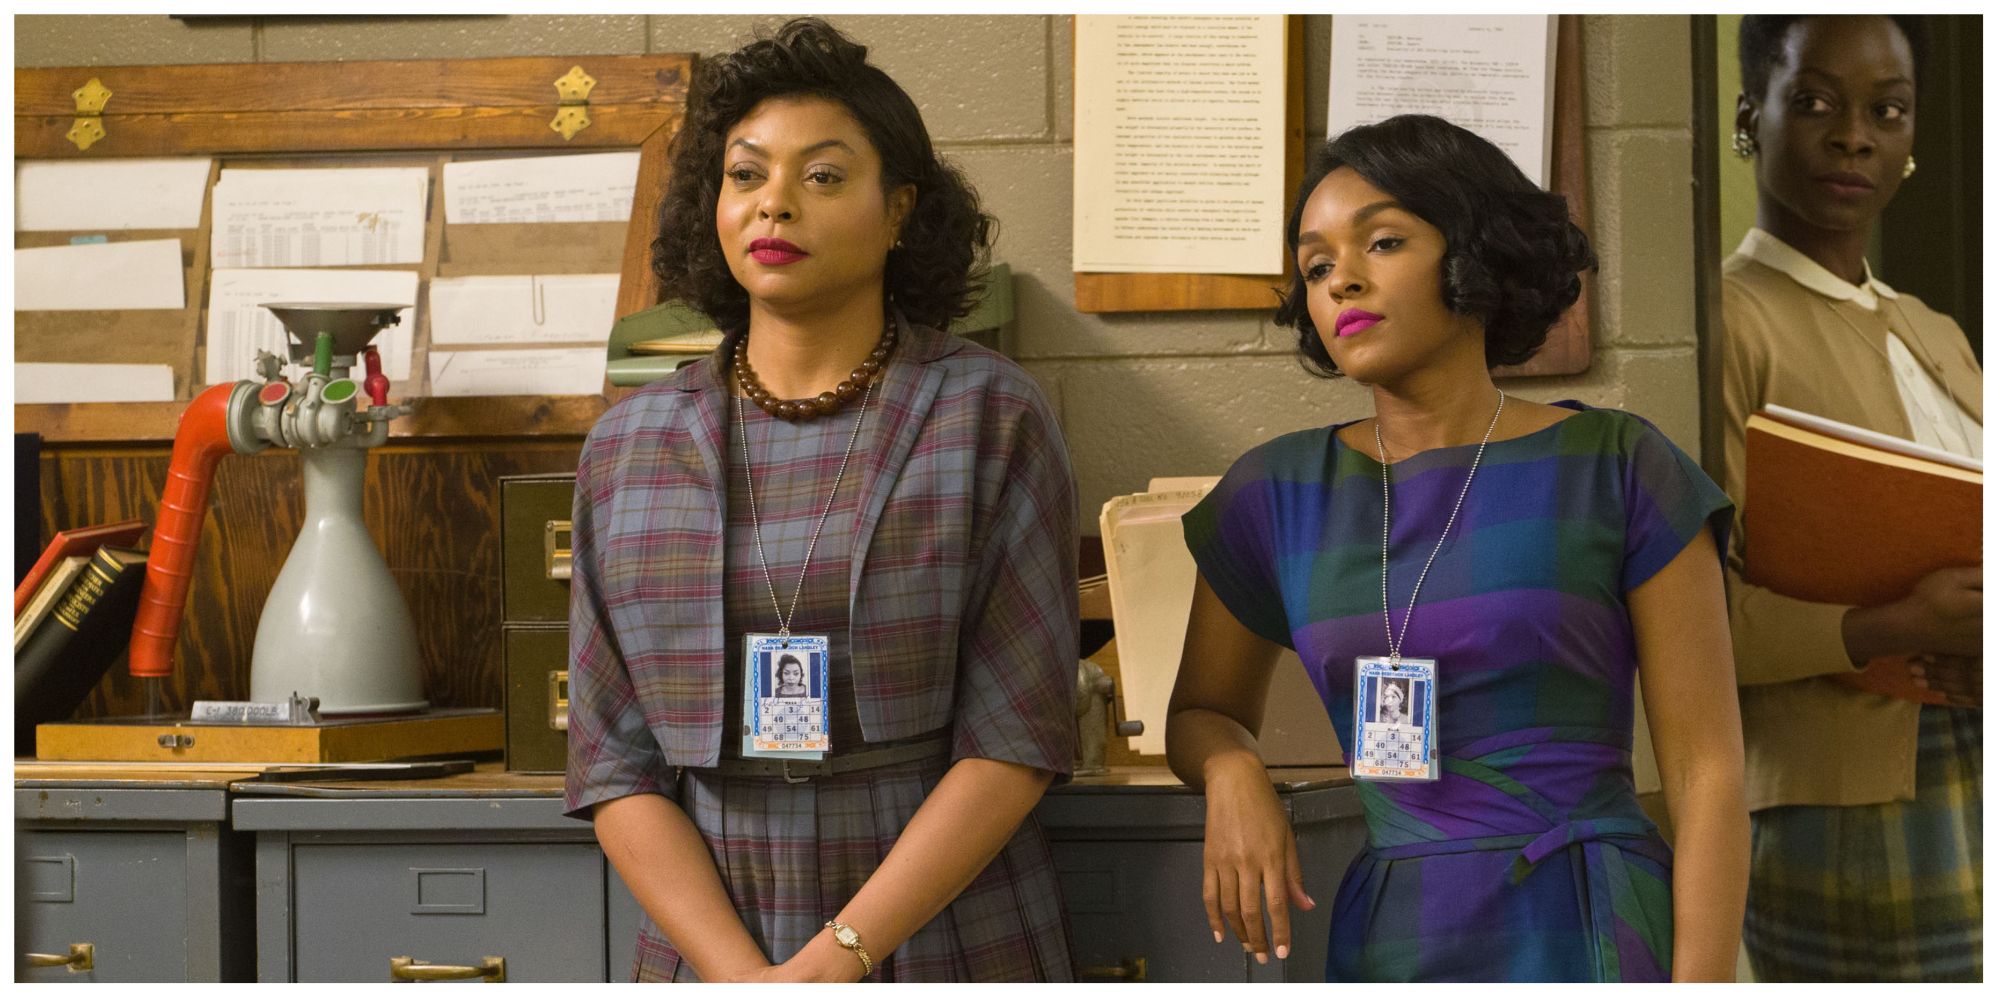 Taraji P. Henson and Janelle Monáe stood in their office in Hidden Figures